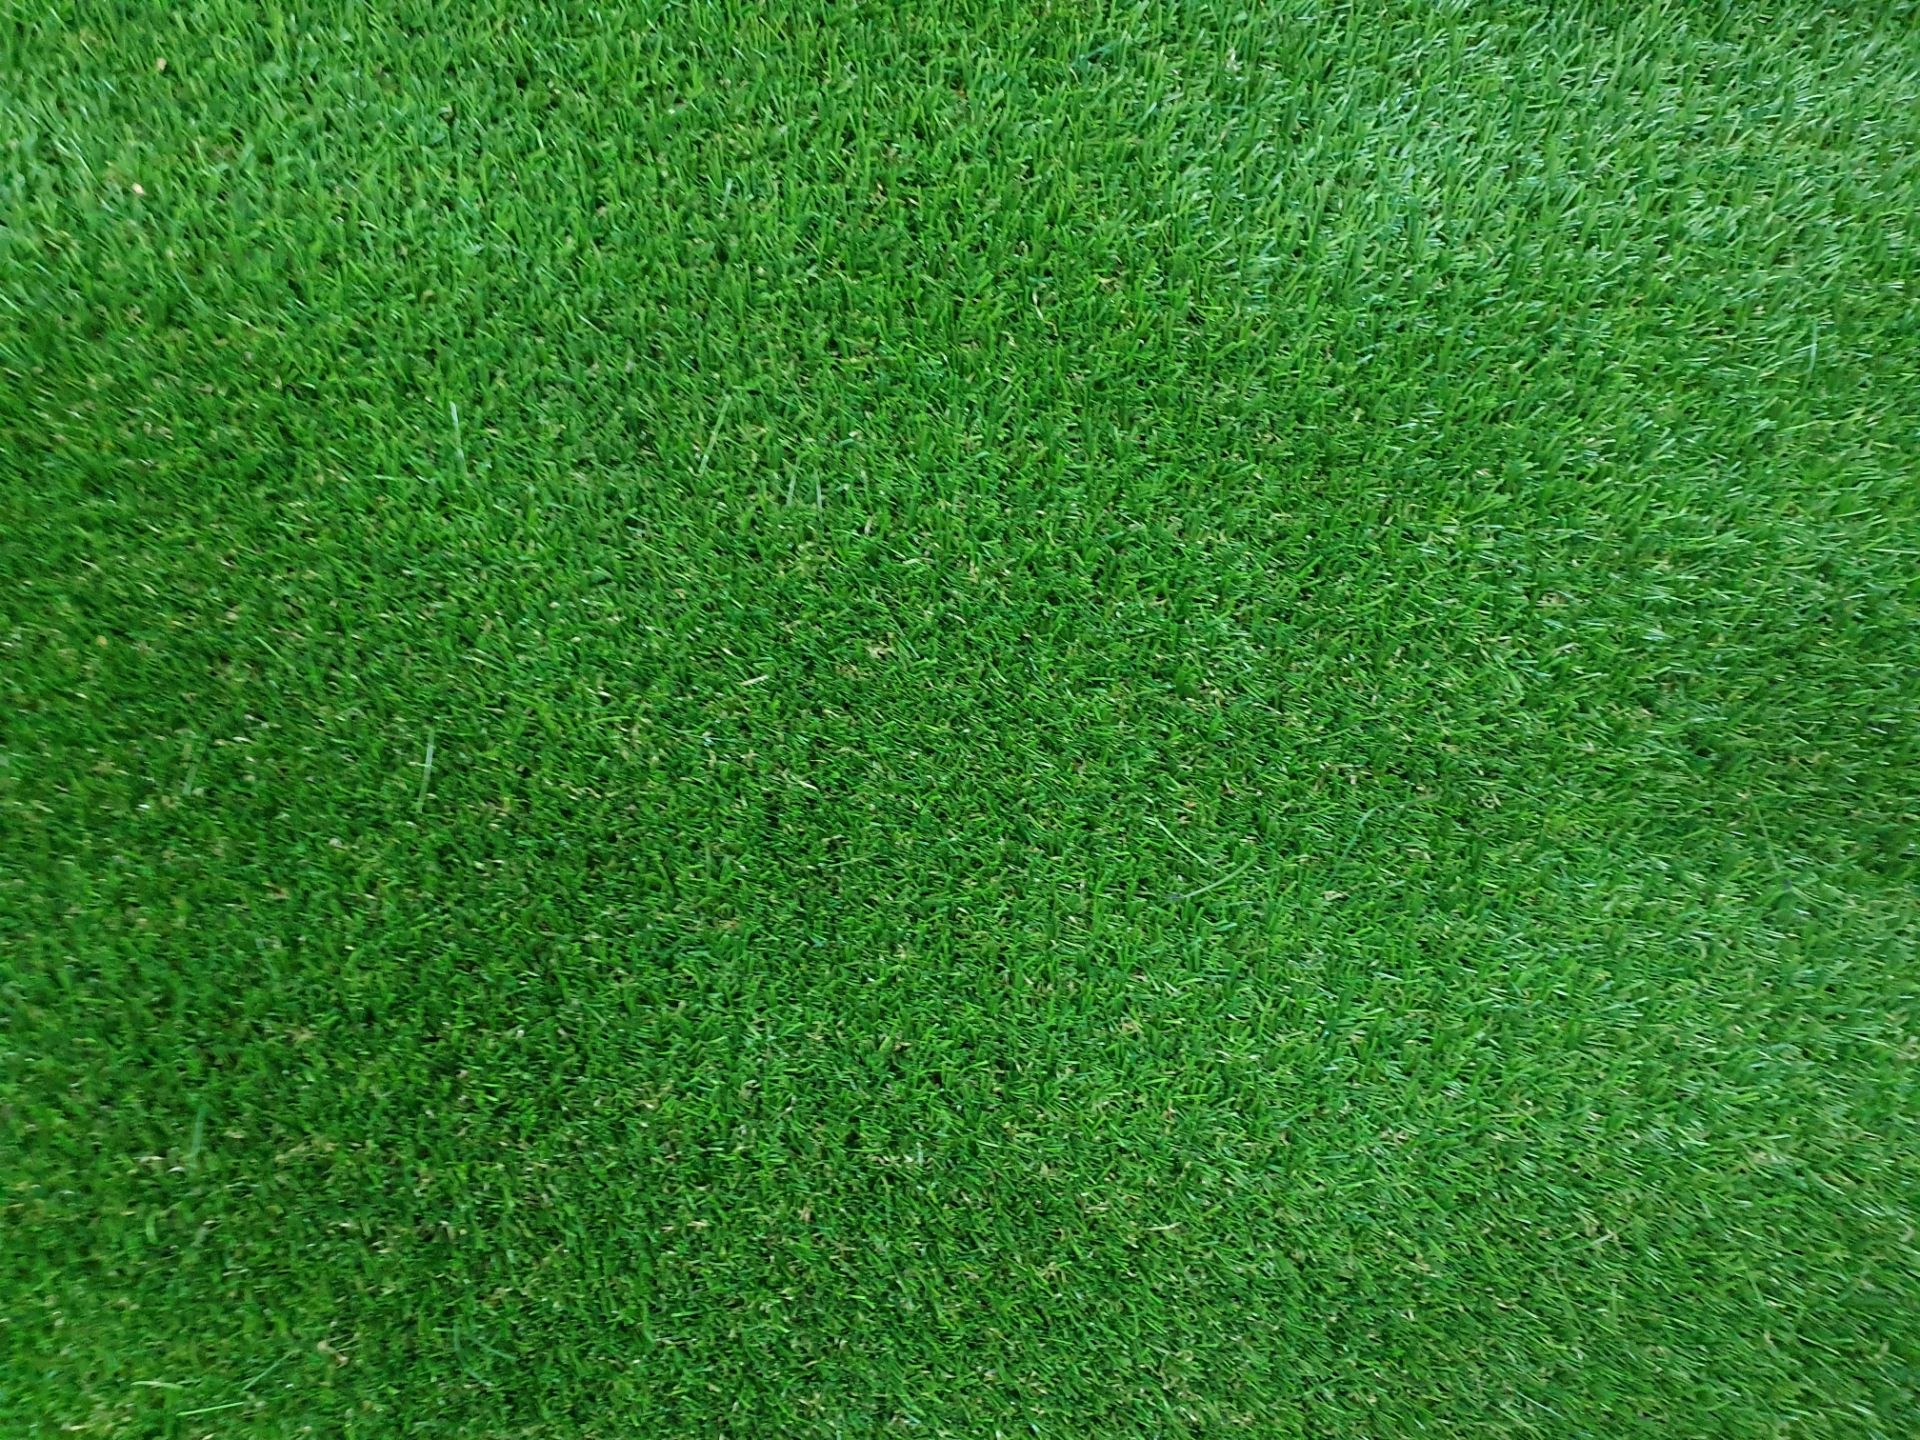 Roll of Green Artificial Grass | Approximate size: 4m x 3.5m - Image 2 of 3